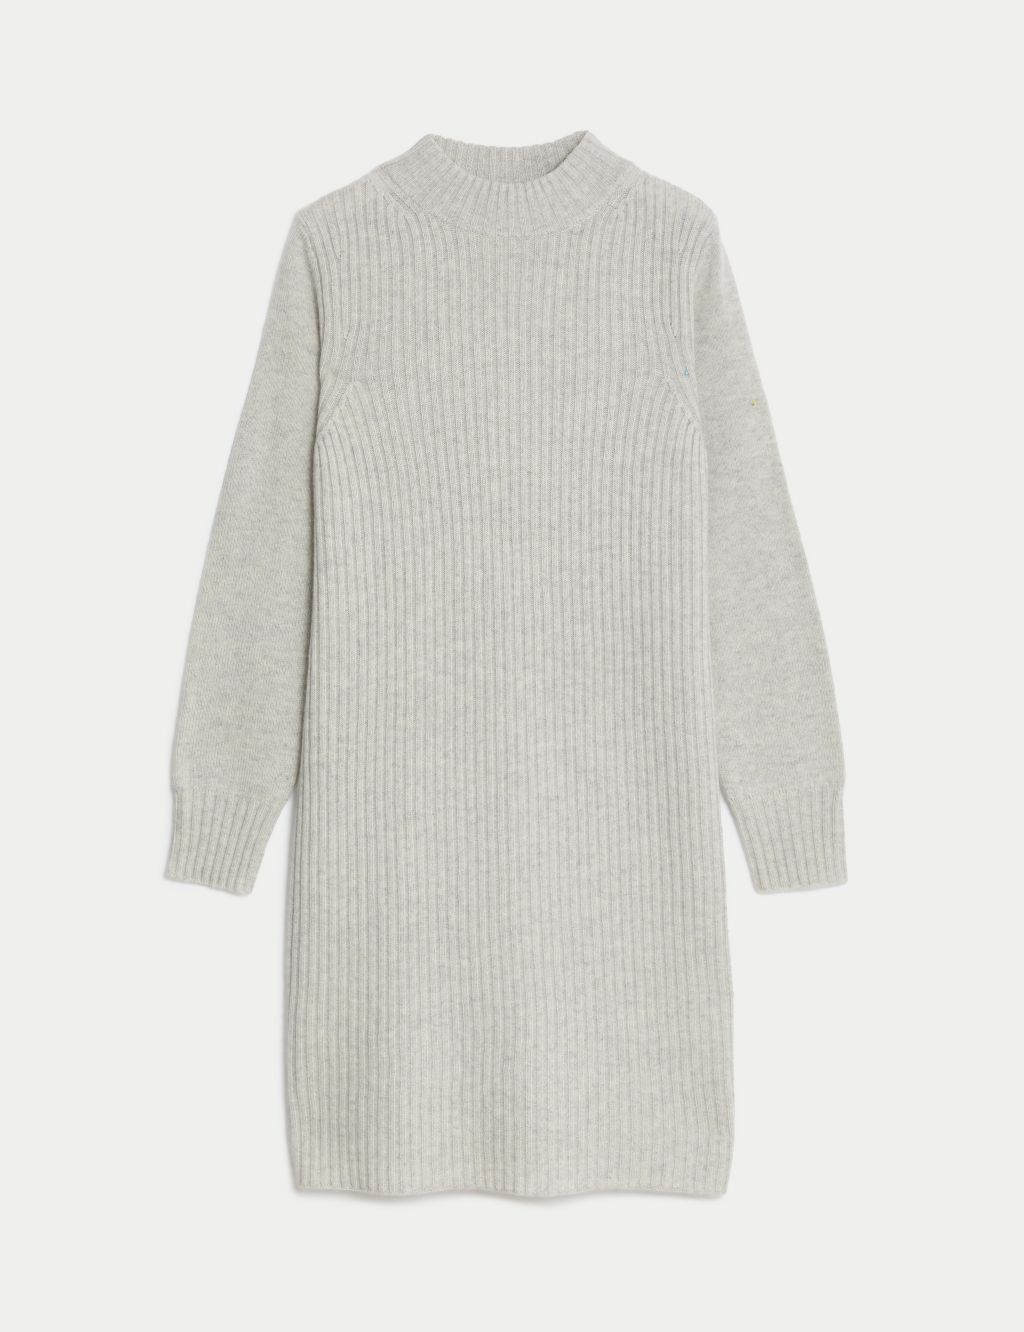 Merino Wool Rich Knitted Dress with Cashmere image 1